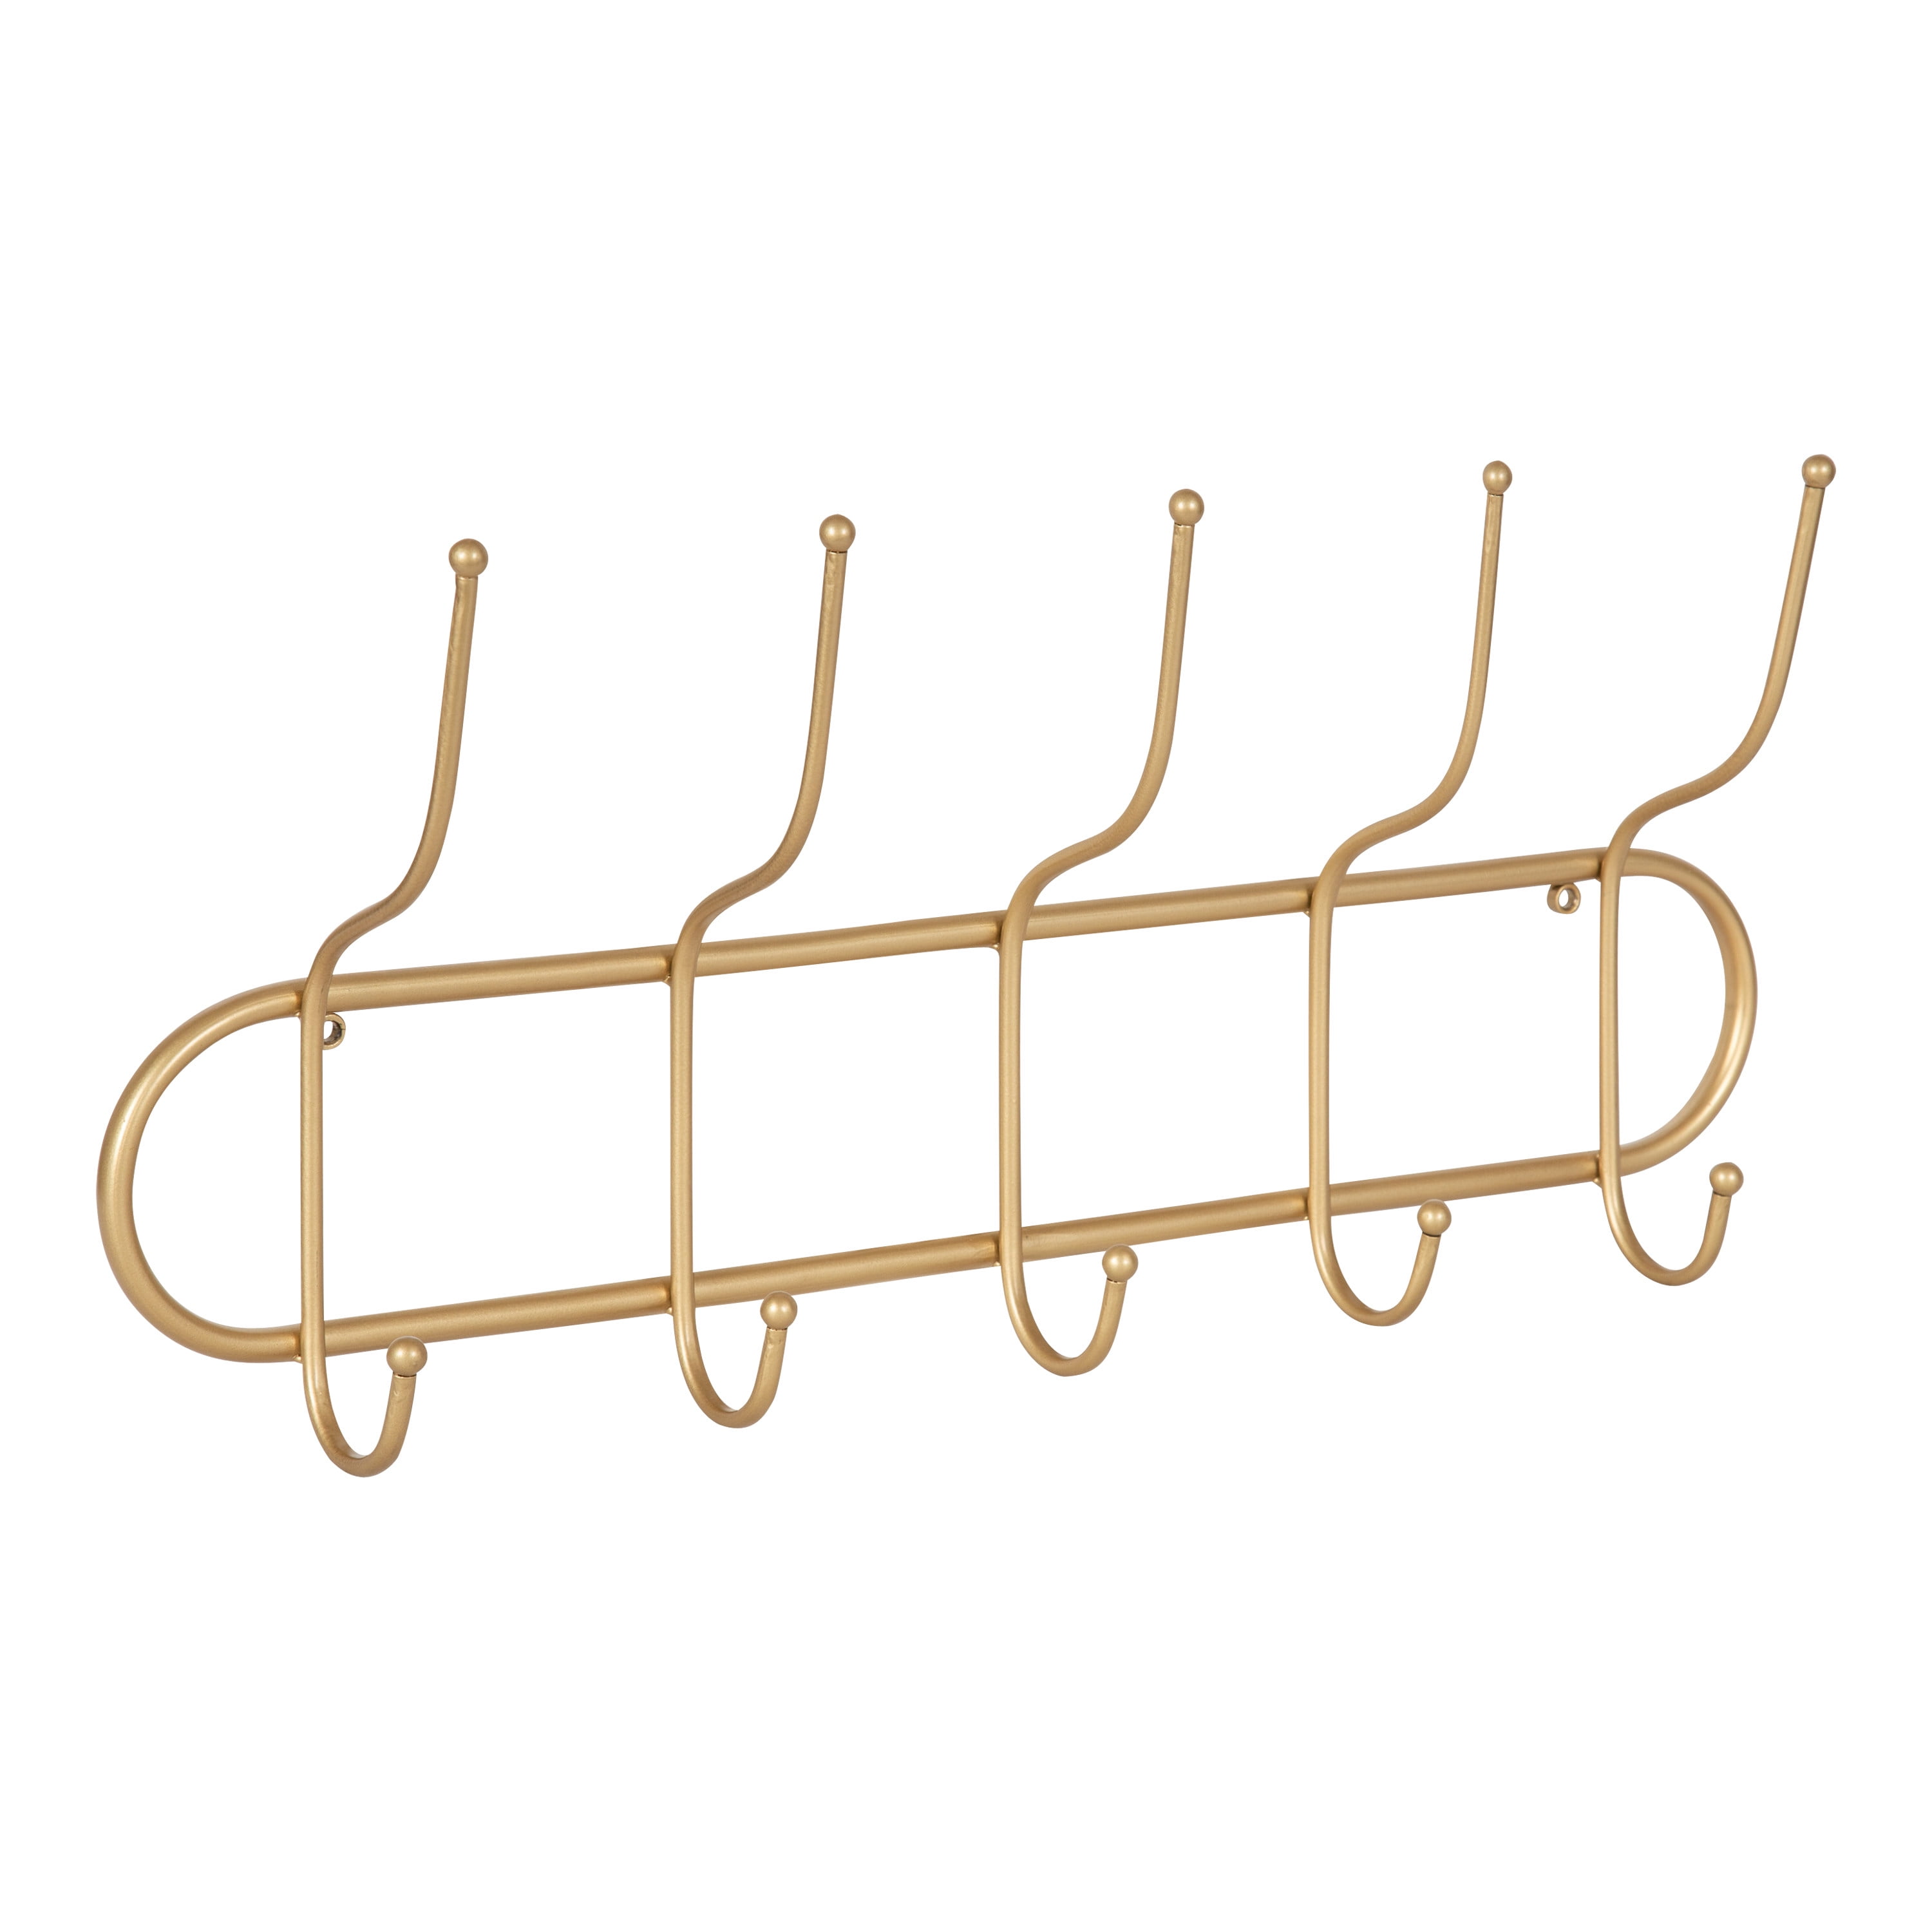 Kate and Laurel Vaida Boho Wall Mounted Coat Rack, 25 x 4 x 12, Gold, Five  Decorative Glam Double Sided Coat Hooks and Hat Rack with Trendy Capsule